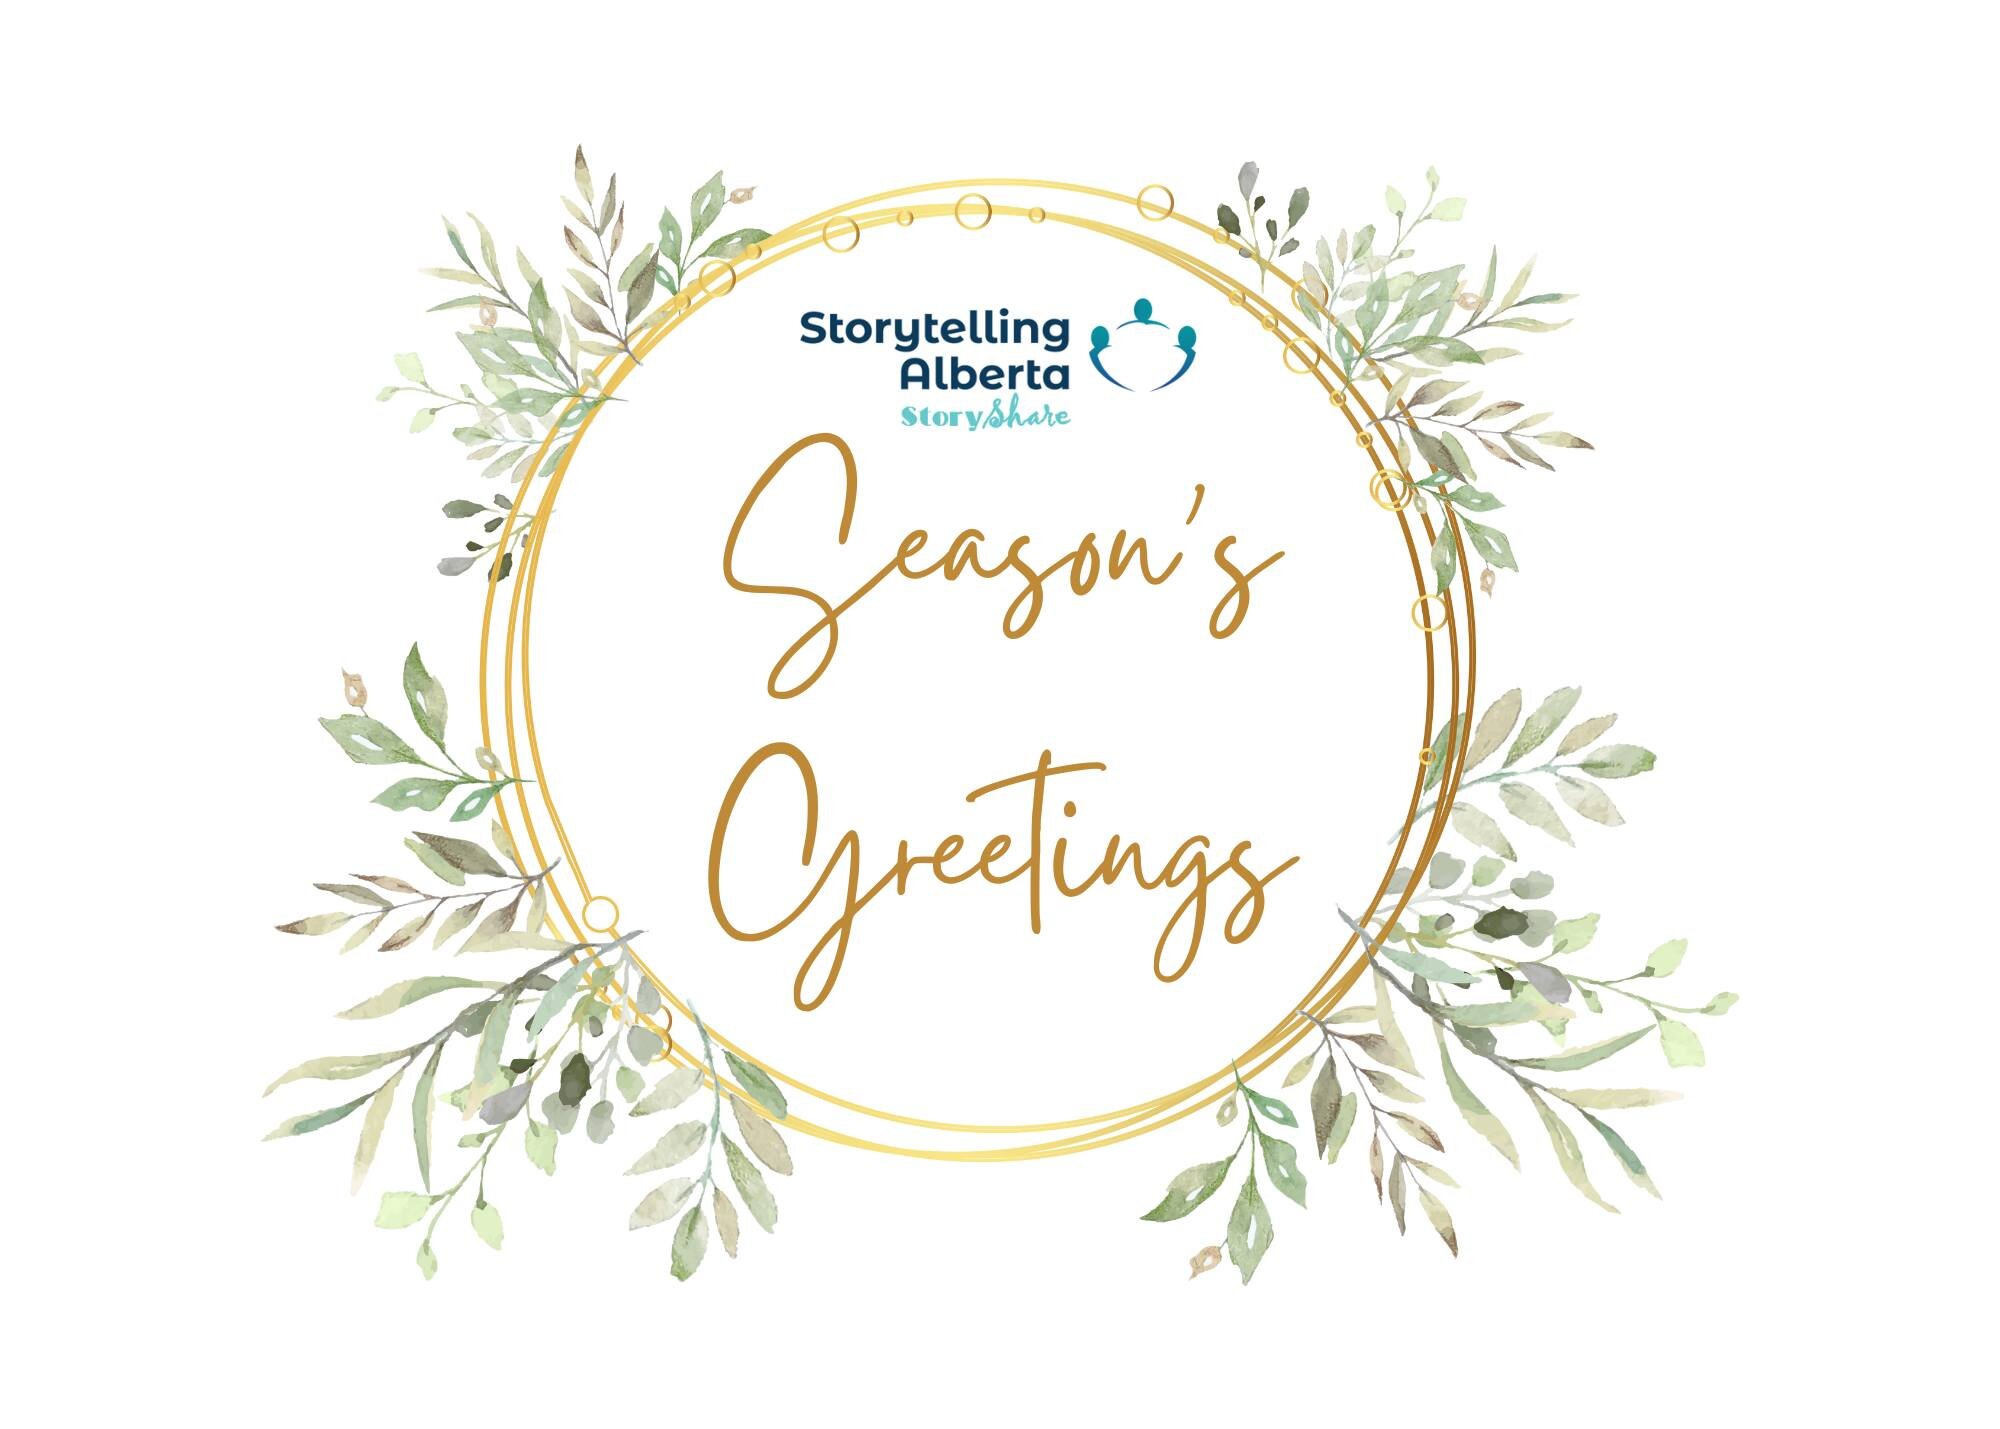 Happy Holidays! We wish everyone a warm and healthy holiday season.  StoryShare Calgary is closed for services. All services will resume January 3rd, 2023.